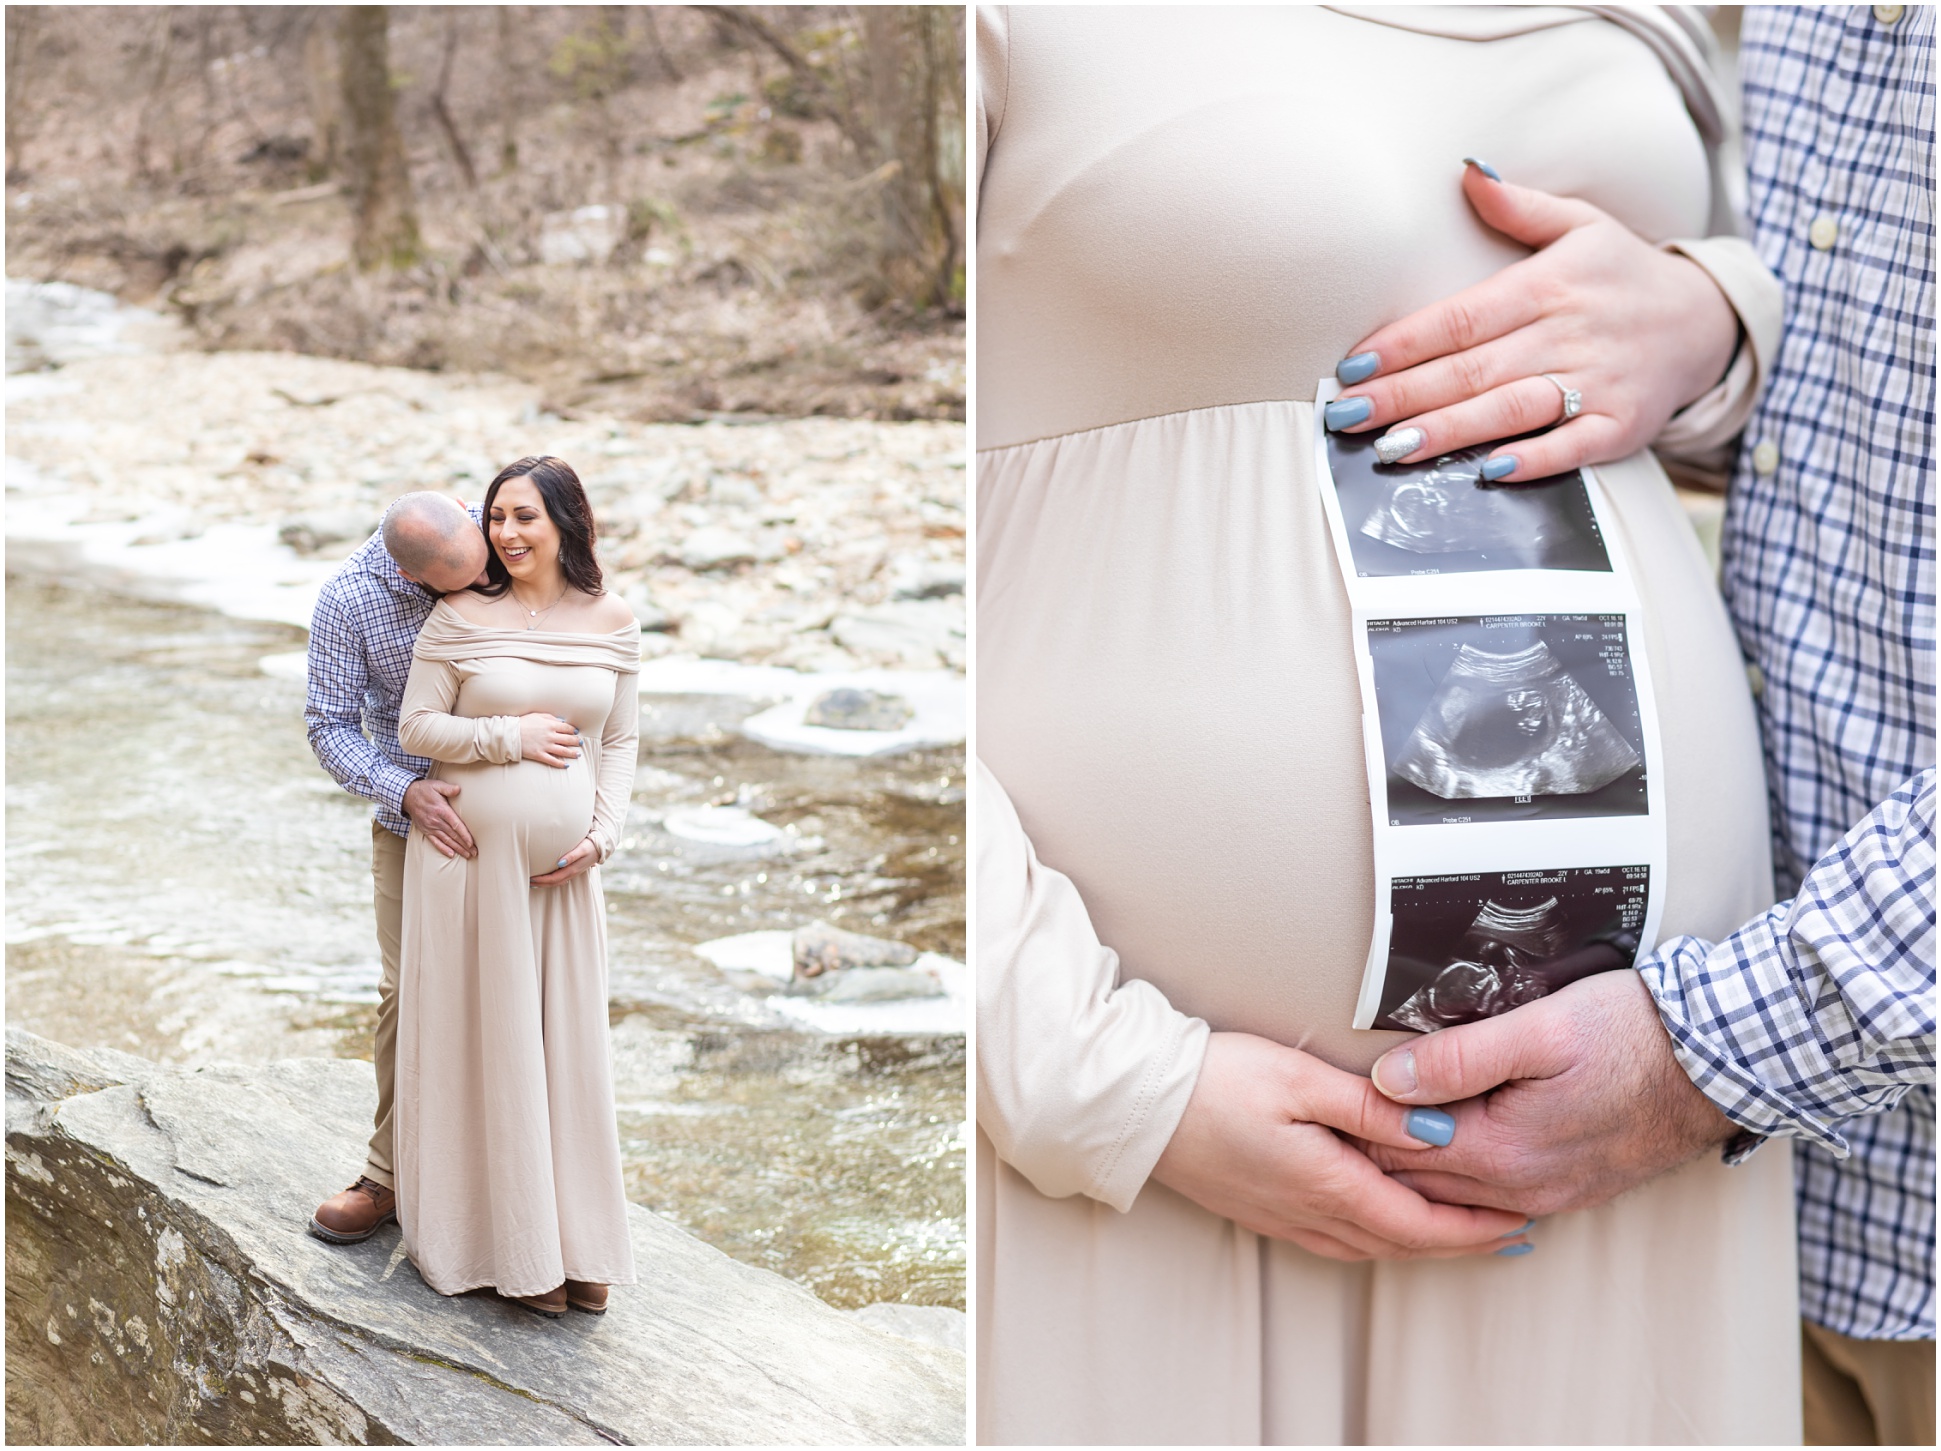 Left Image: Pregnant Couple dancing by the water, Right Image: Close up of sonogram over the baby bump